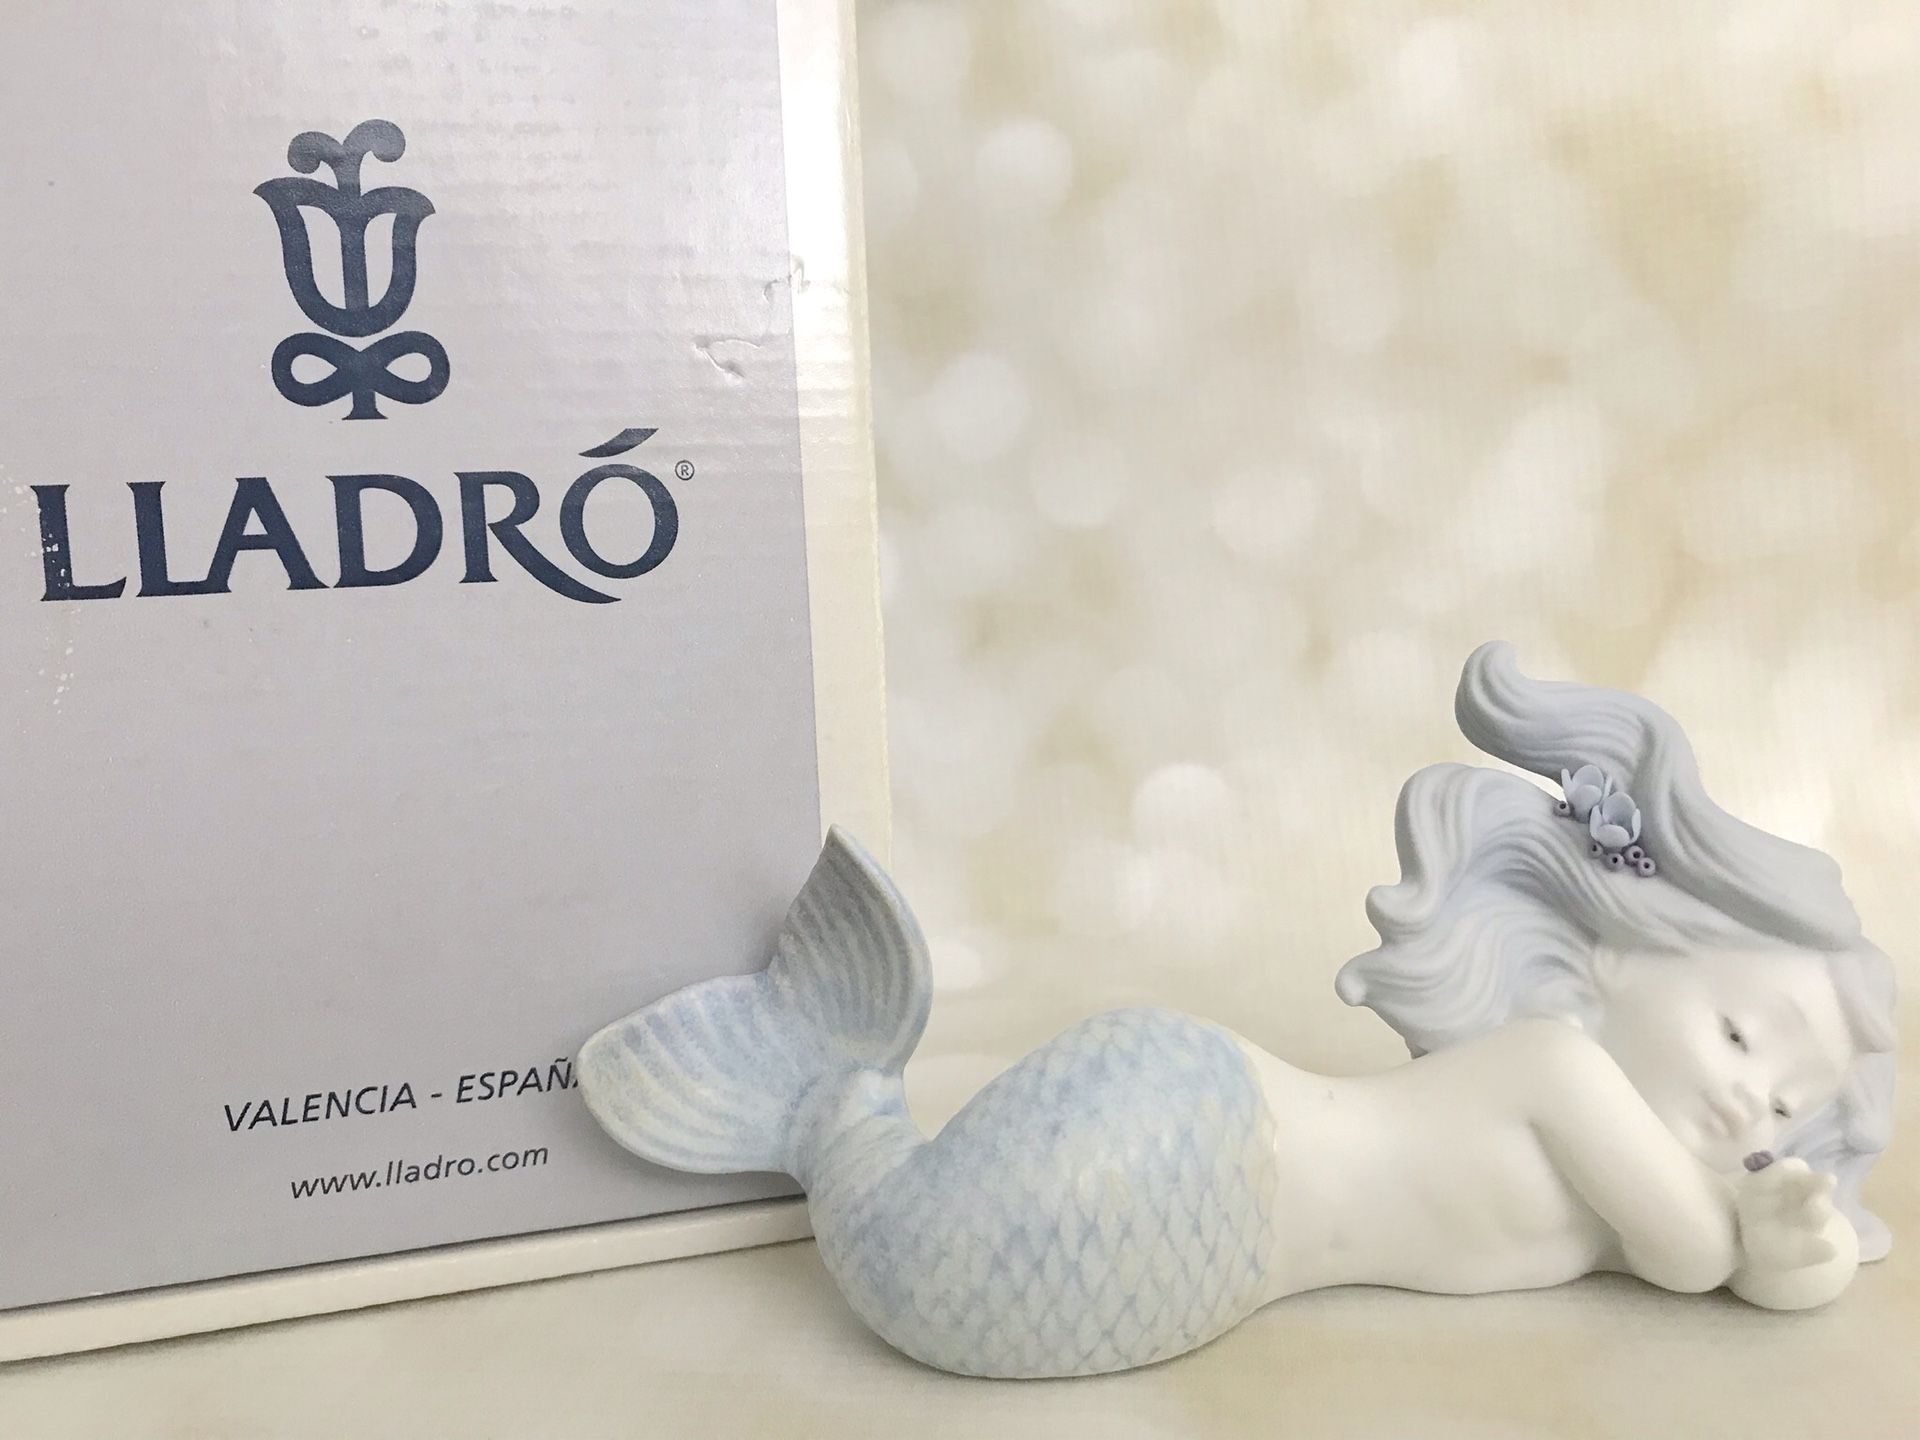 Mermaid day dreaming at sea (matte) porcelain figurine by Lladro #18112